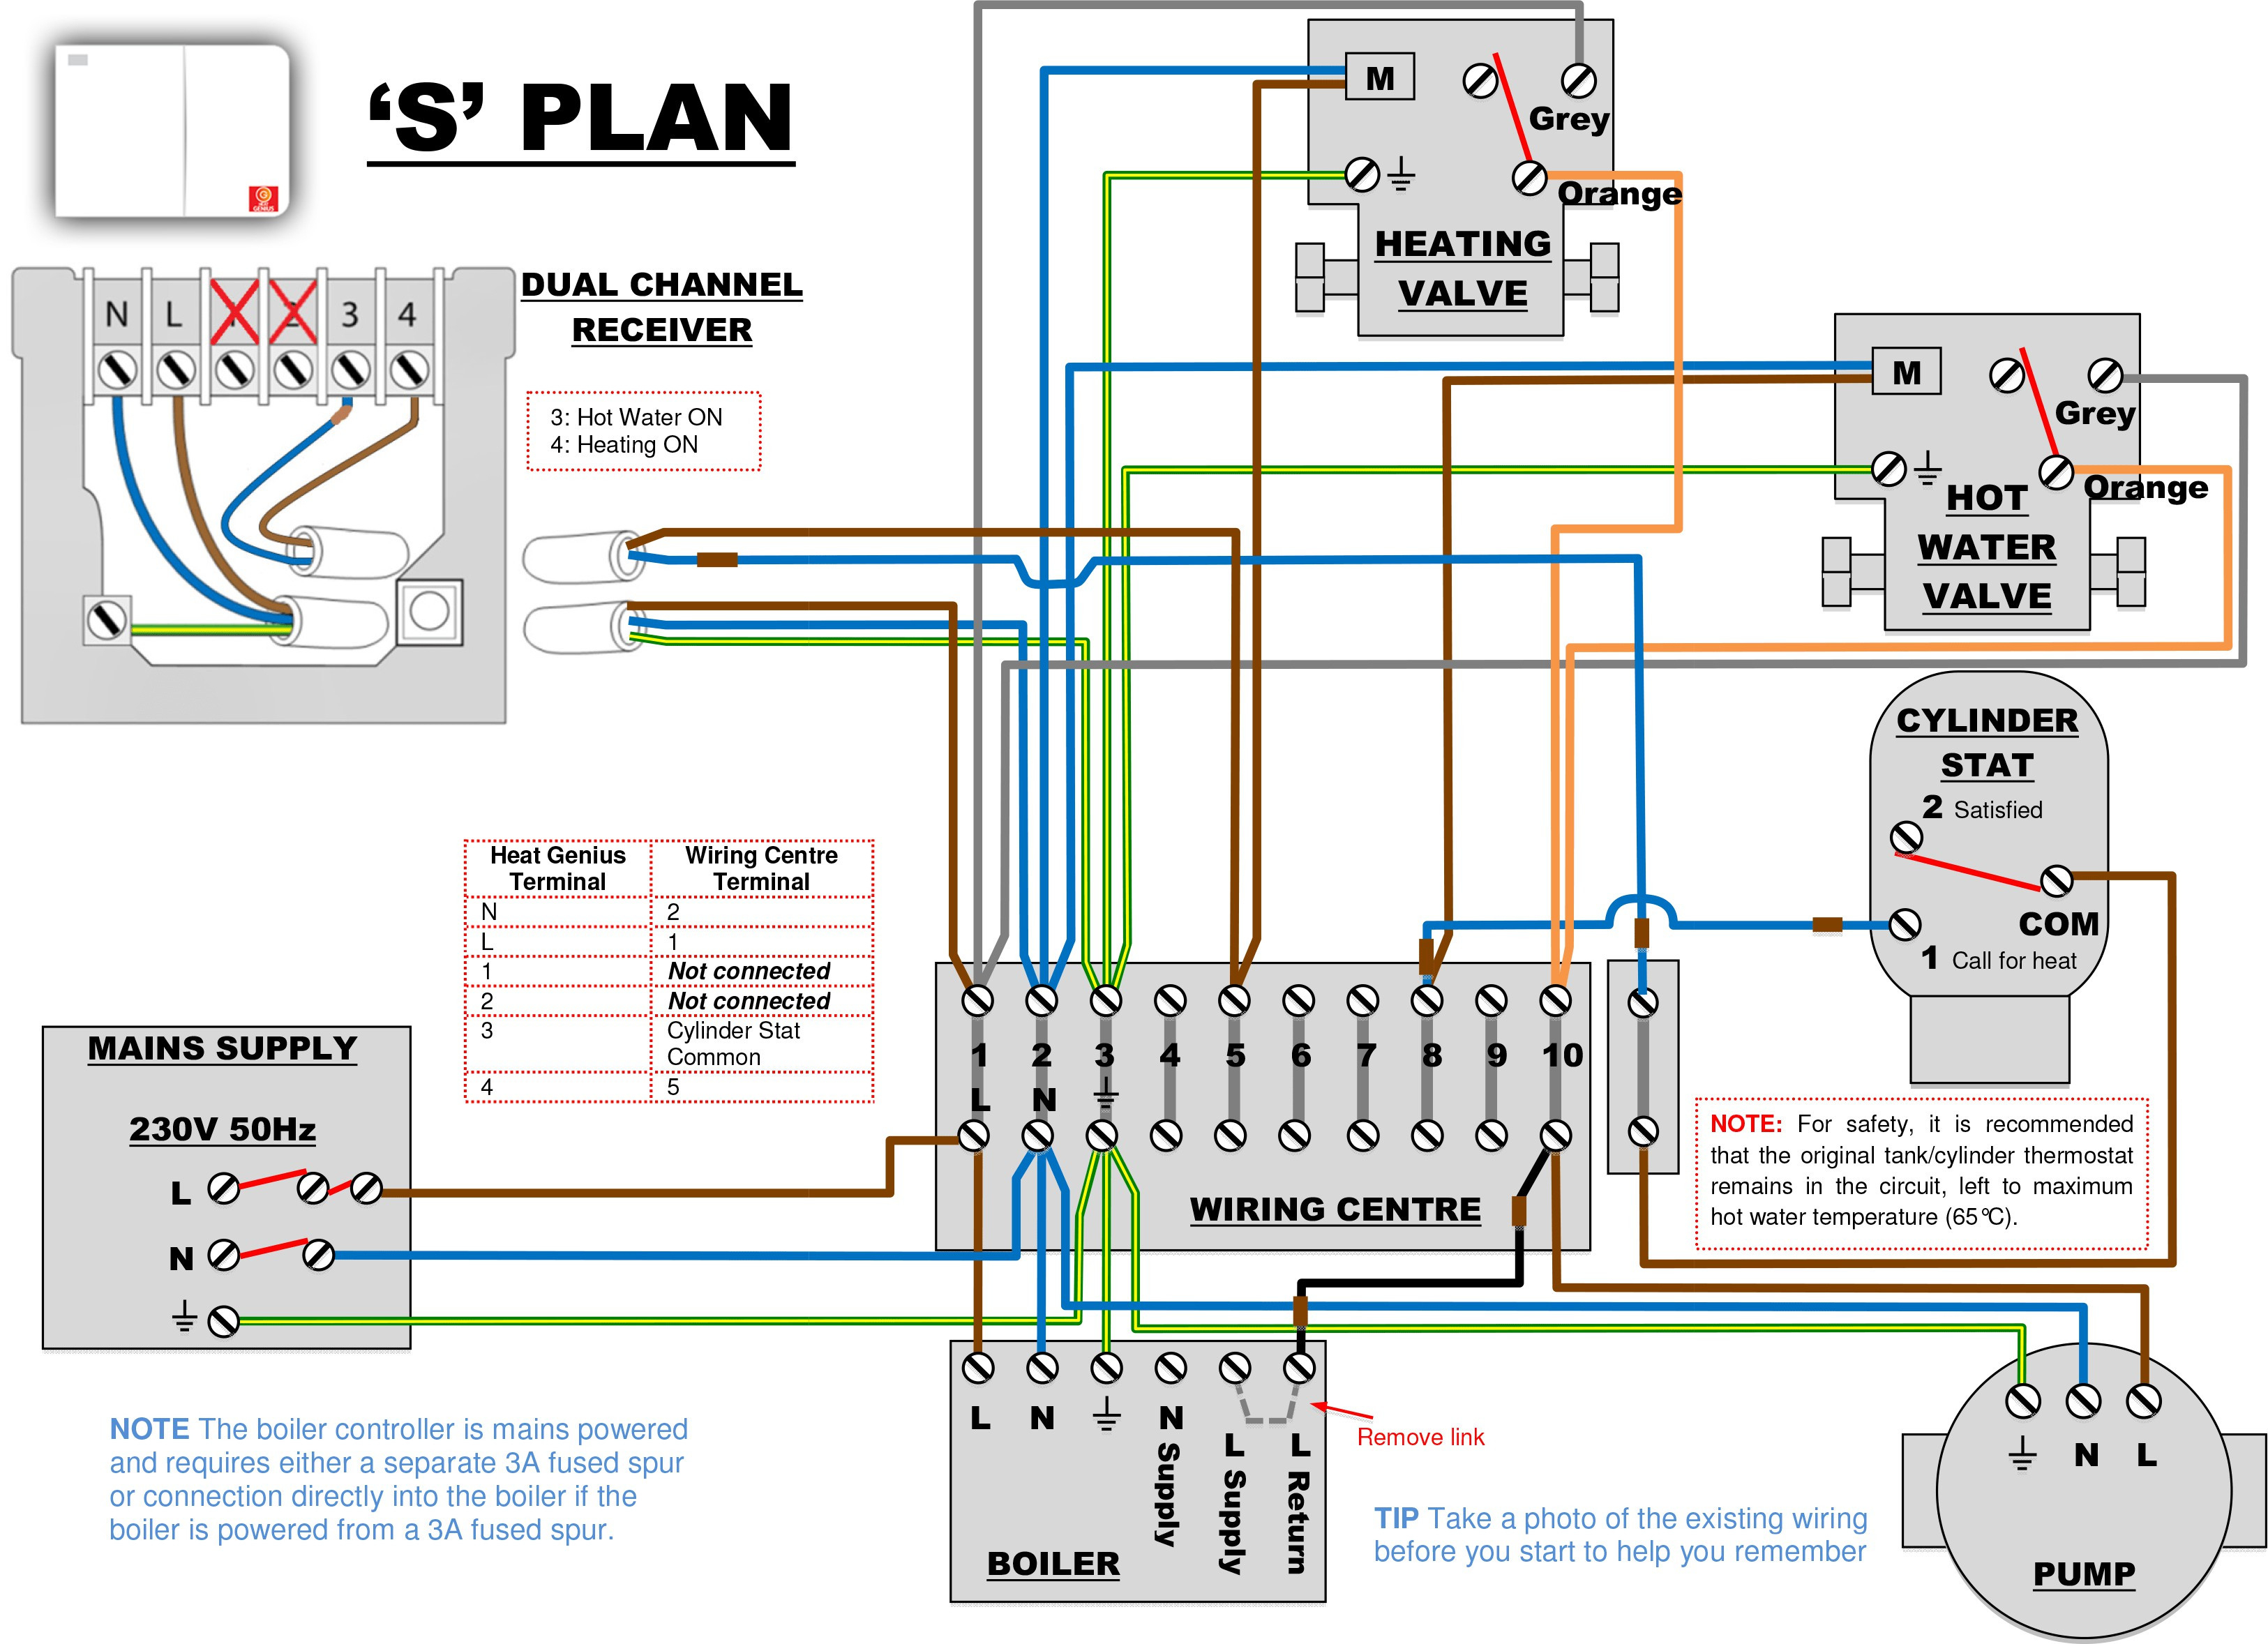 Nest Wiring Diagram Wiring Diagram For The Nest Thermostat Sample